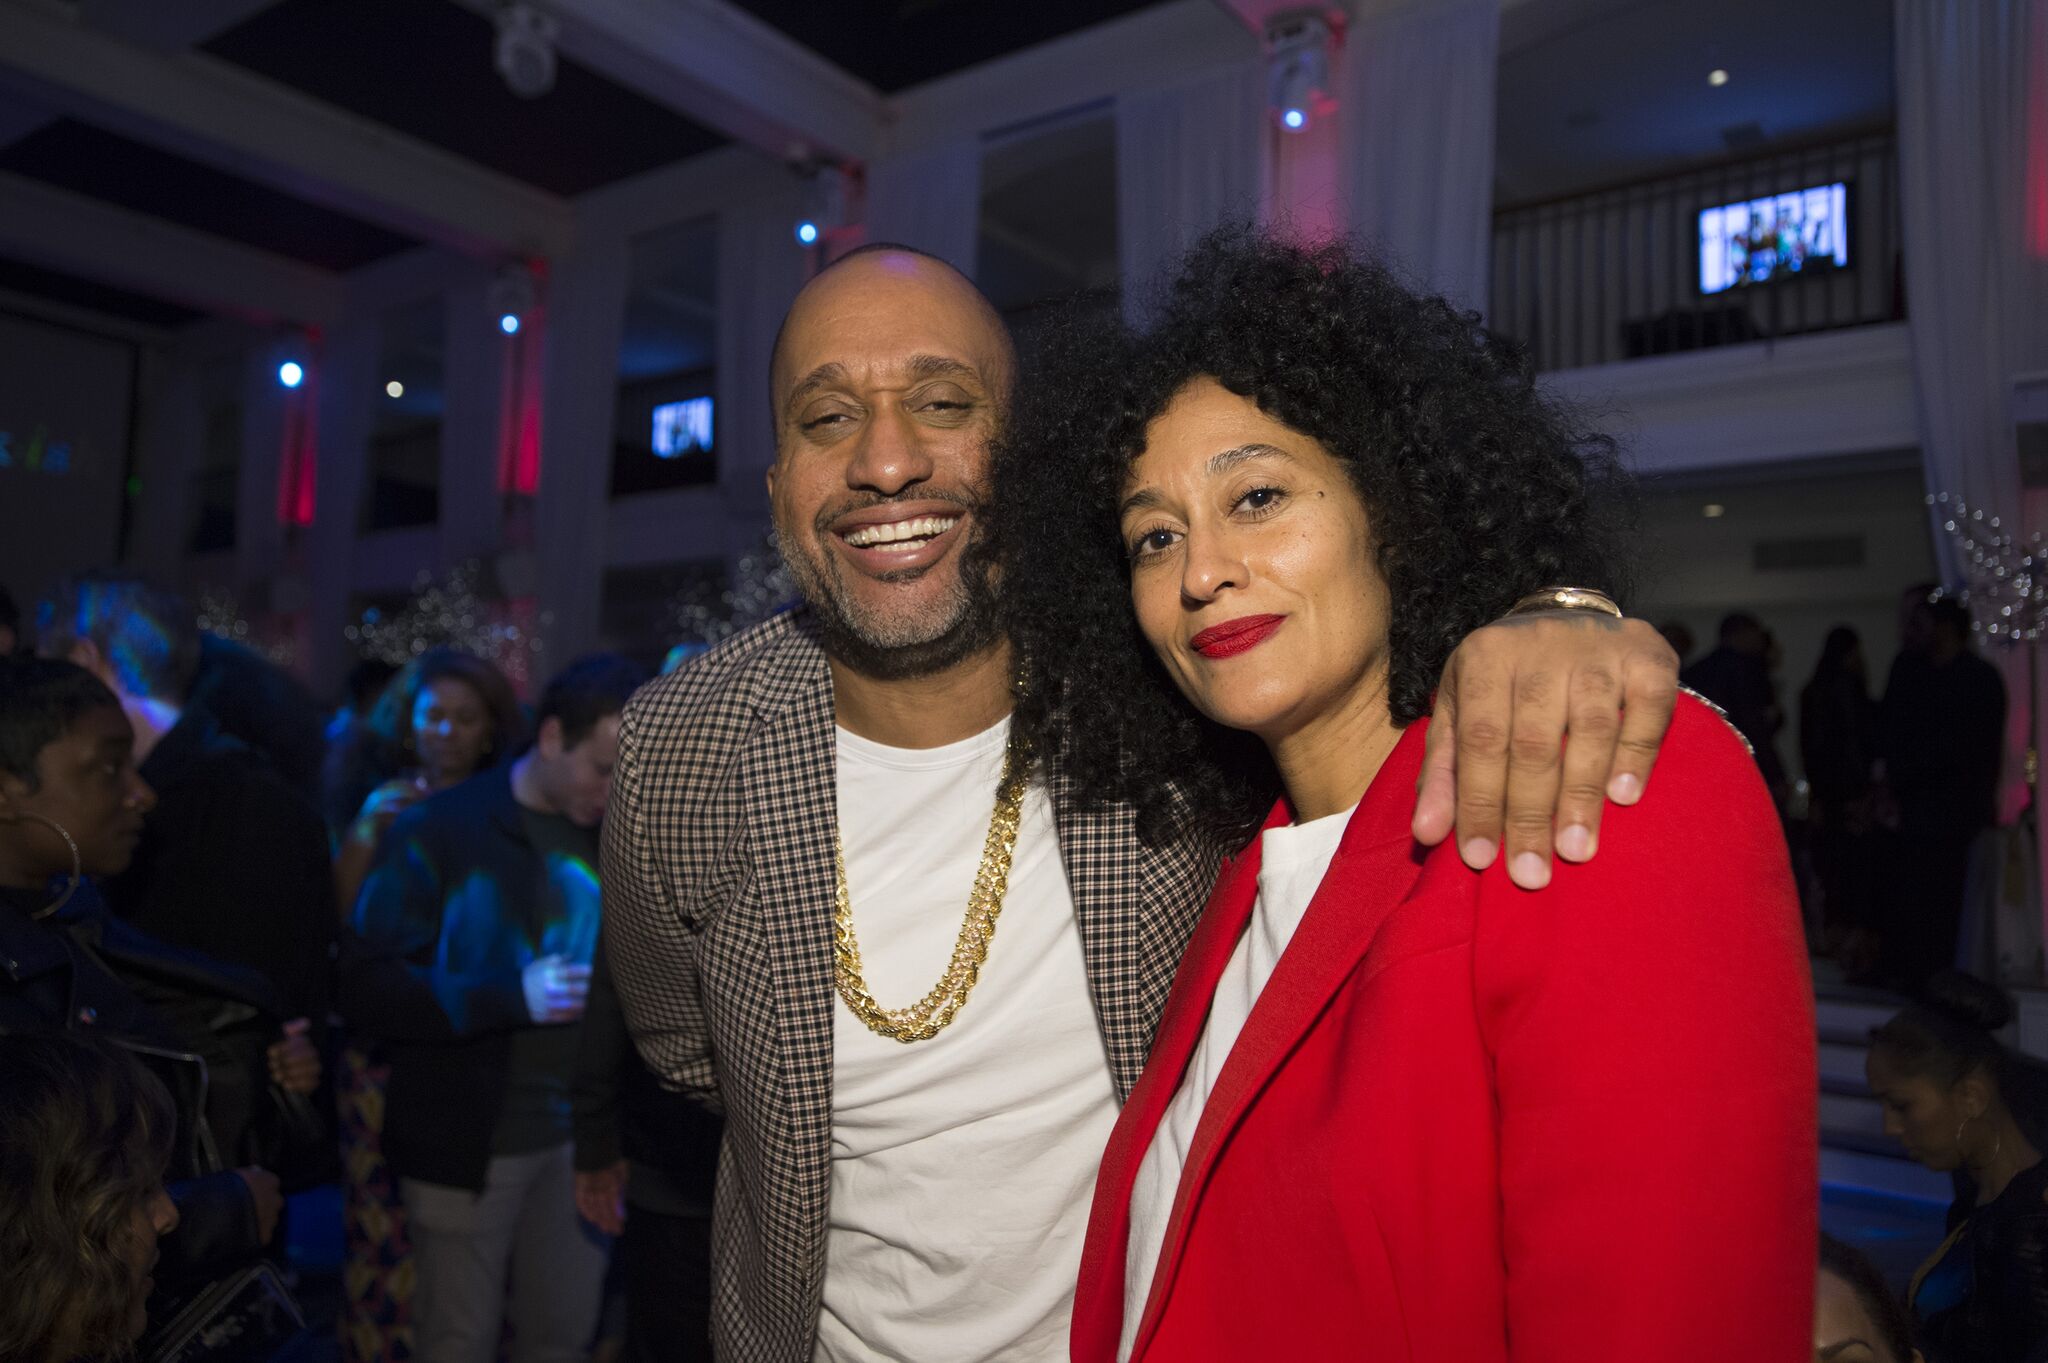 Kenya Barris and Tracee Ellis Ross at the Season 4 wrap party of "Black-ish"  in Los Angeles. | Photo: Getty Images